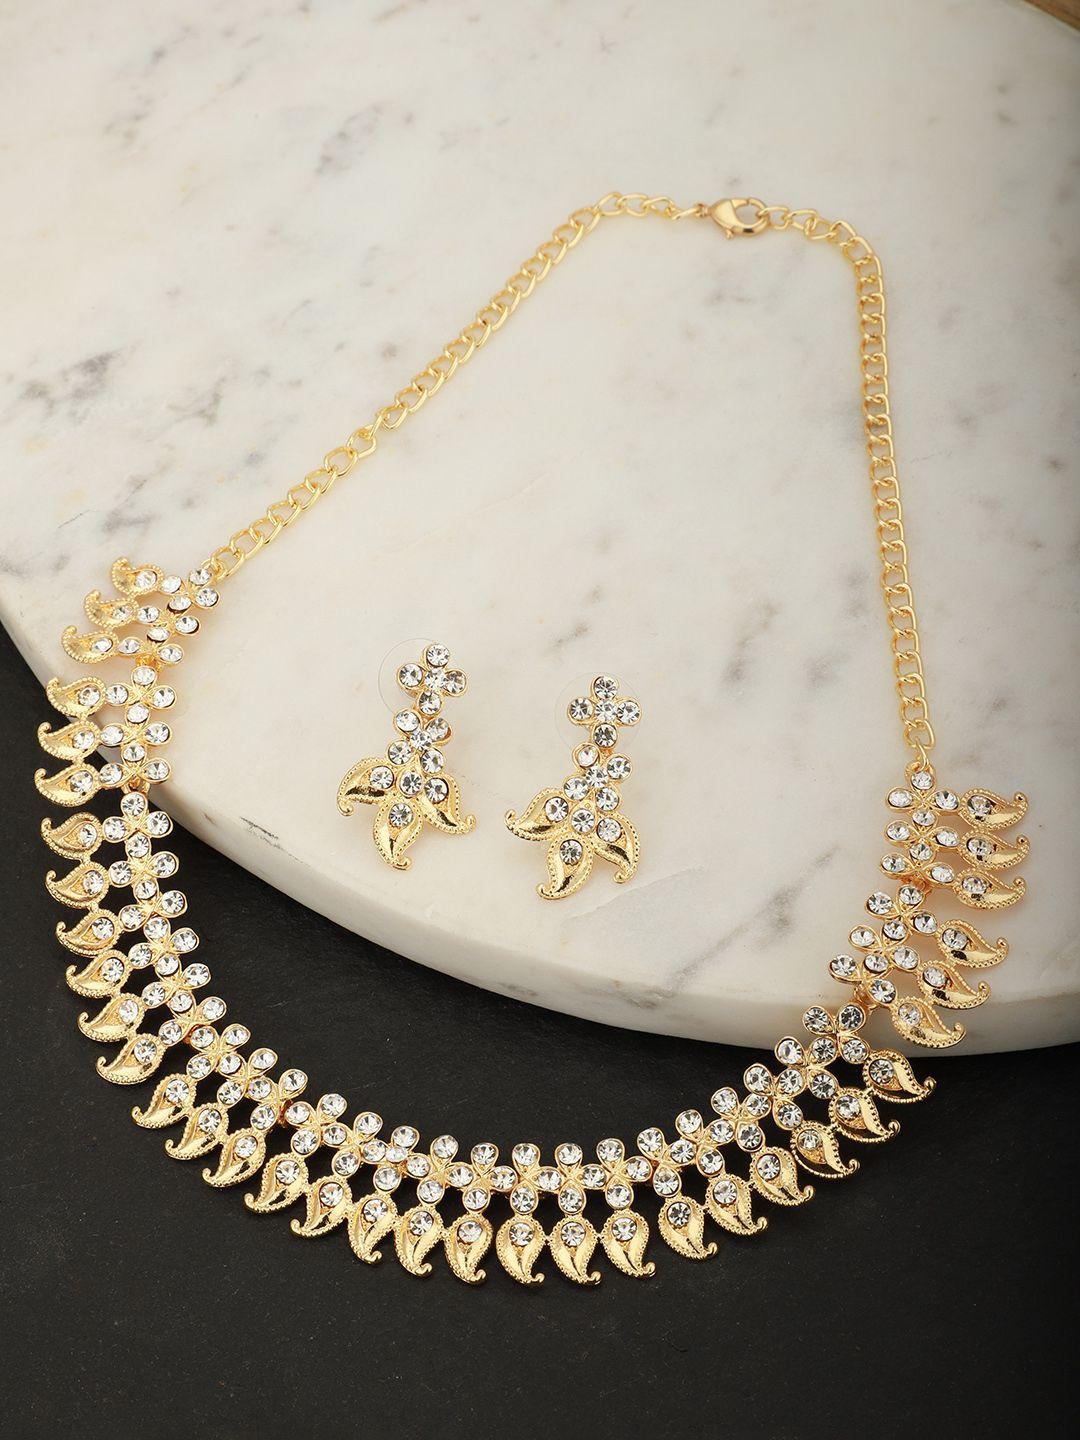 carlton-london-gold-plated-cz-studded-handcrafted-jewellery-set